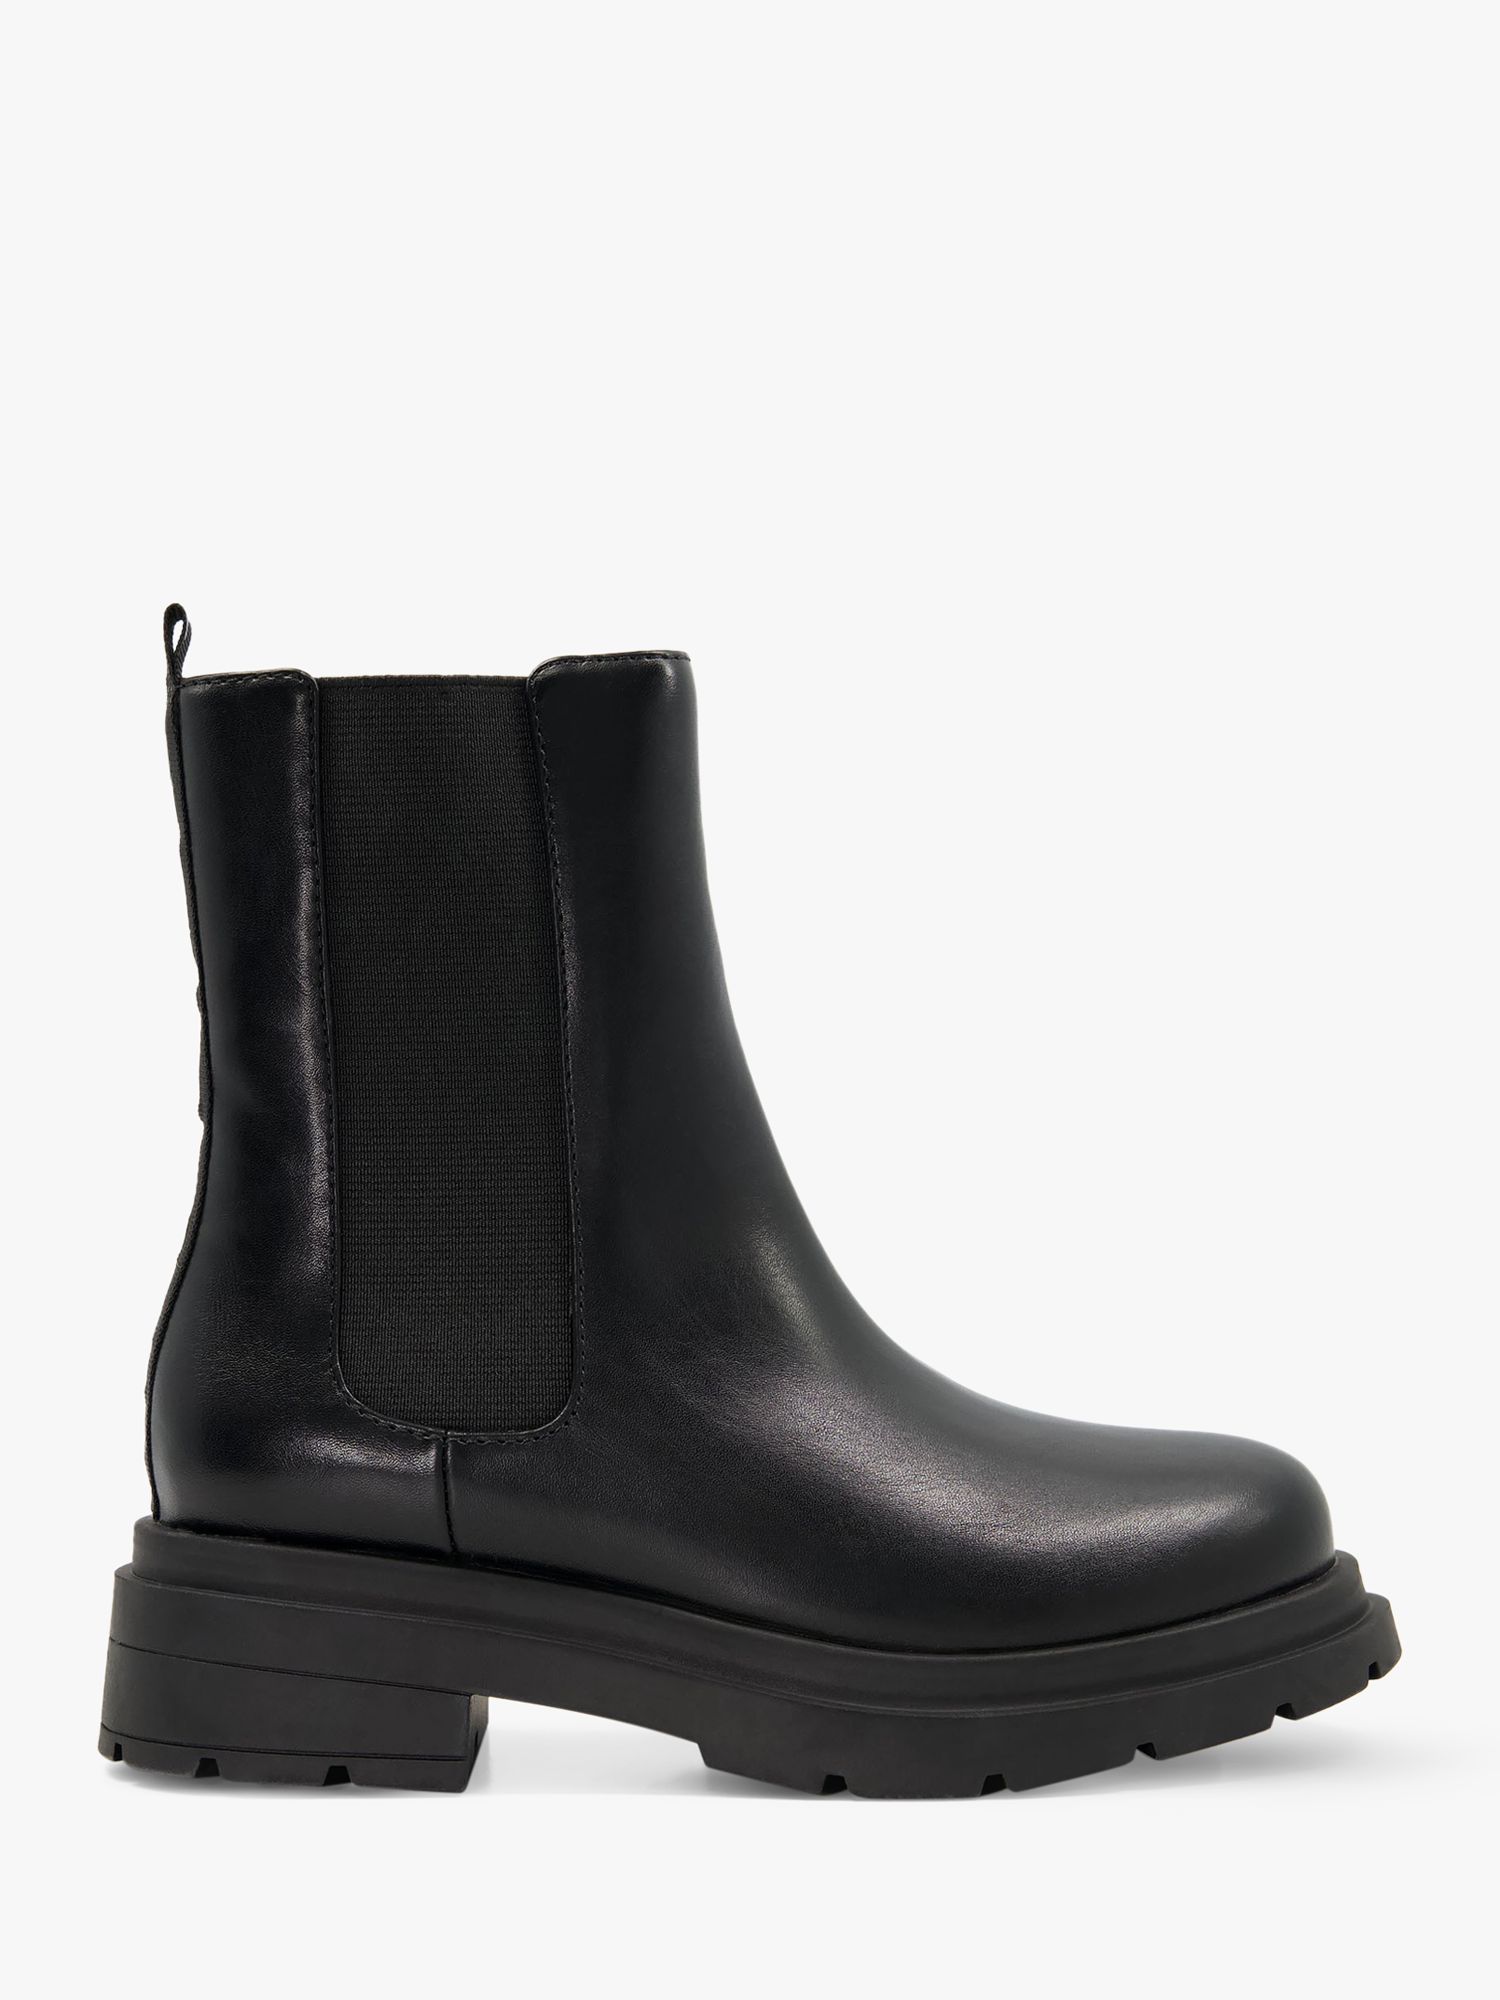 Dune Kids' Peppa Chunky Sole Chelsea Boots at John Lewis & Partners